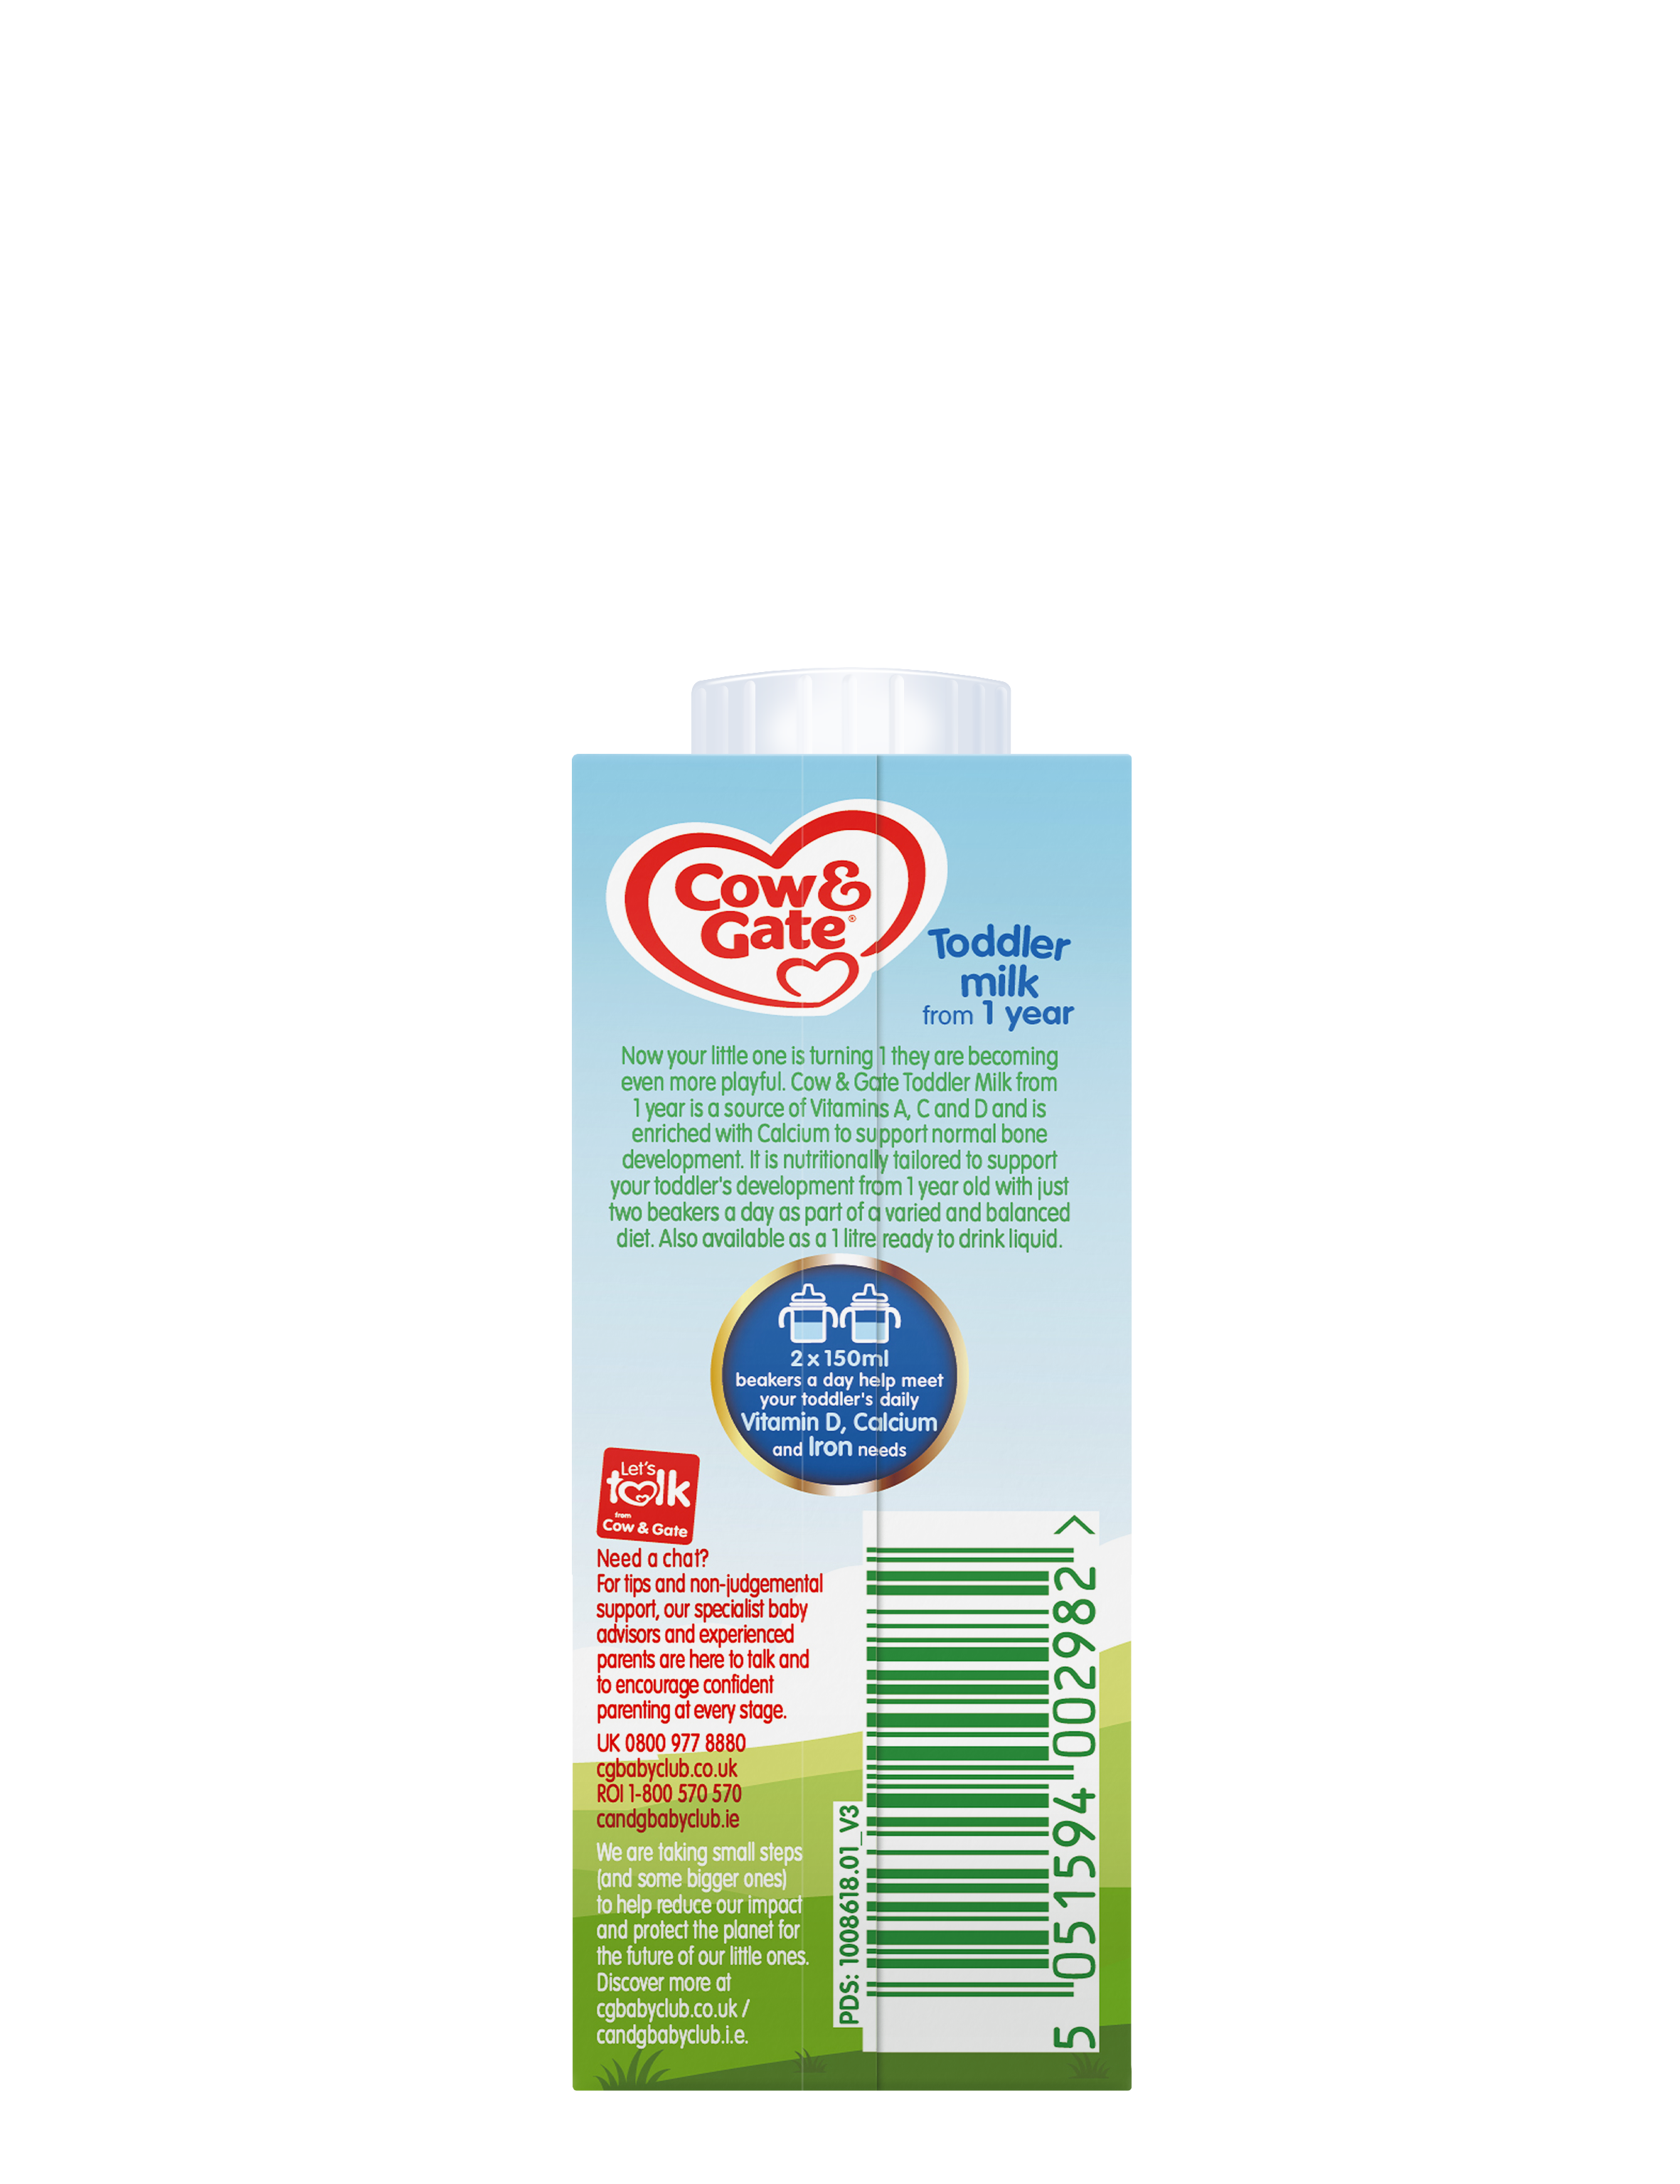 Cow & Gate Stage 3 Toddler Milk Ready to Drink 200ml